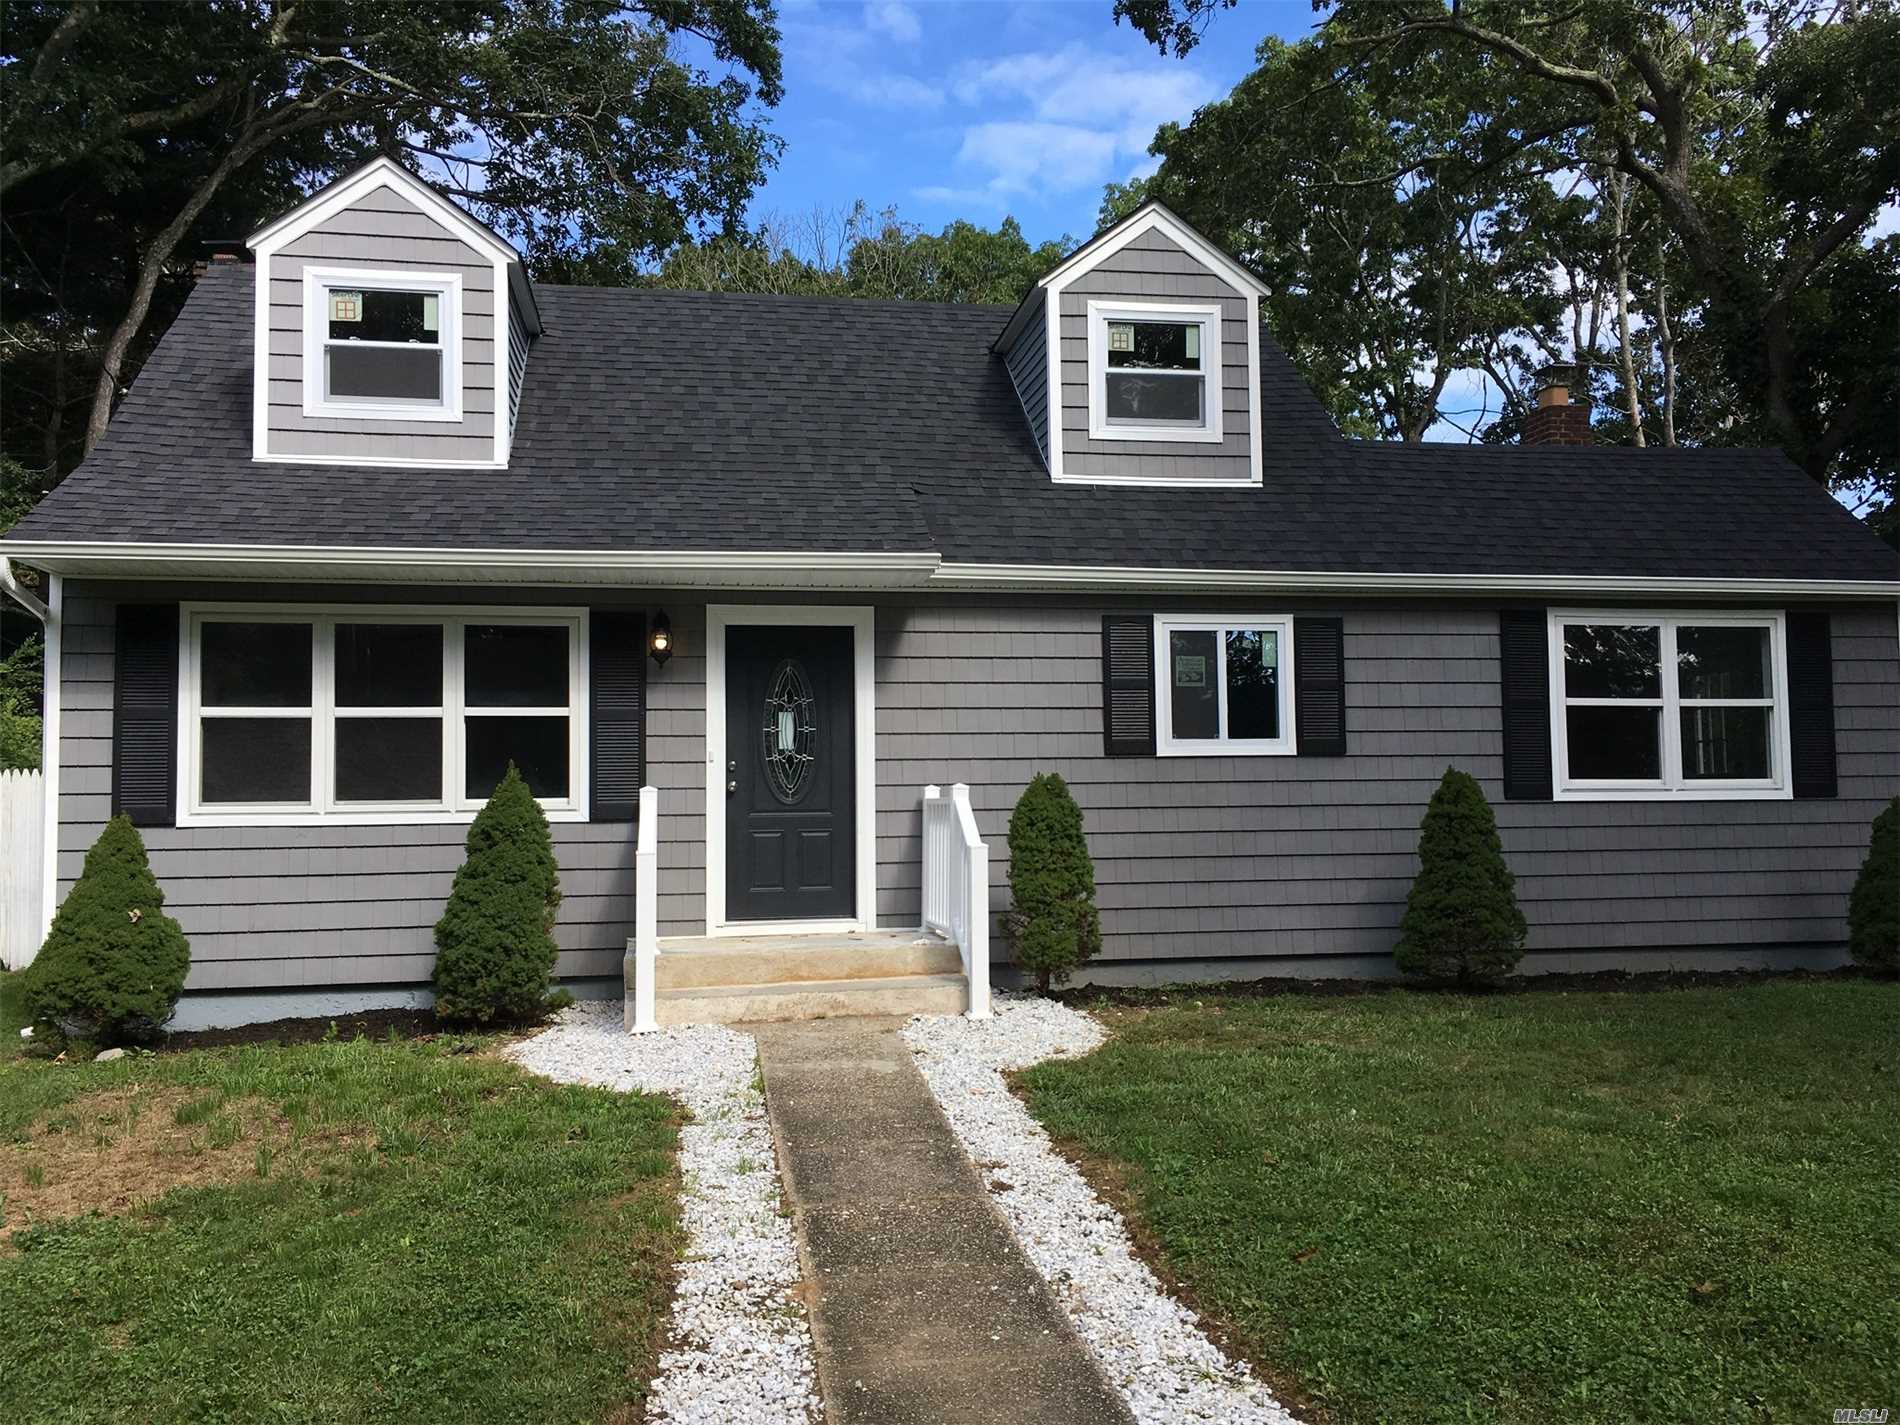 Move Right Into This Completely Renovated 4 Bd/2 Bth Cape Style Home. This House Offer New Roofing, Siding & Windows. As Well As Updated Electric And Heating. New Hw Floors, Updated Kitchen With Granite And Ss Appliances, And Two Updated Baths. There Is A Large Yard That Is Great For Entertaining. Must See!!